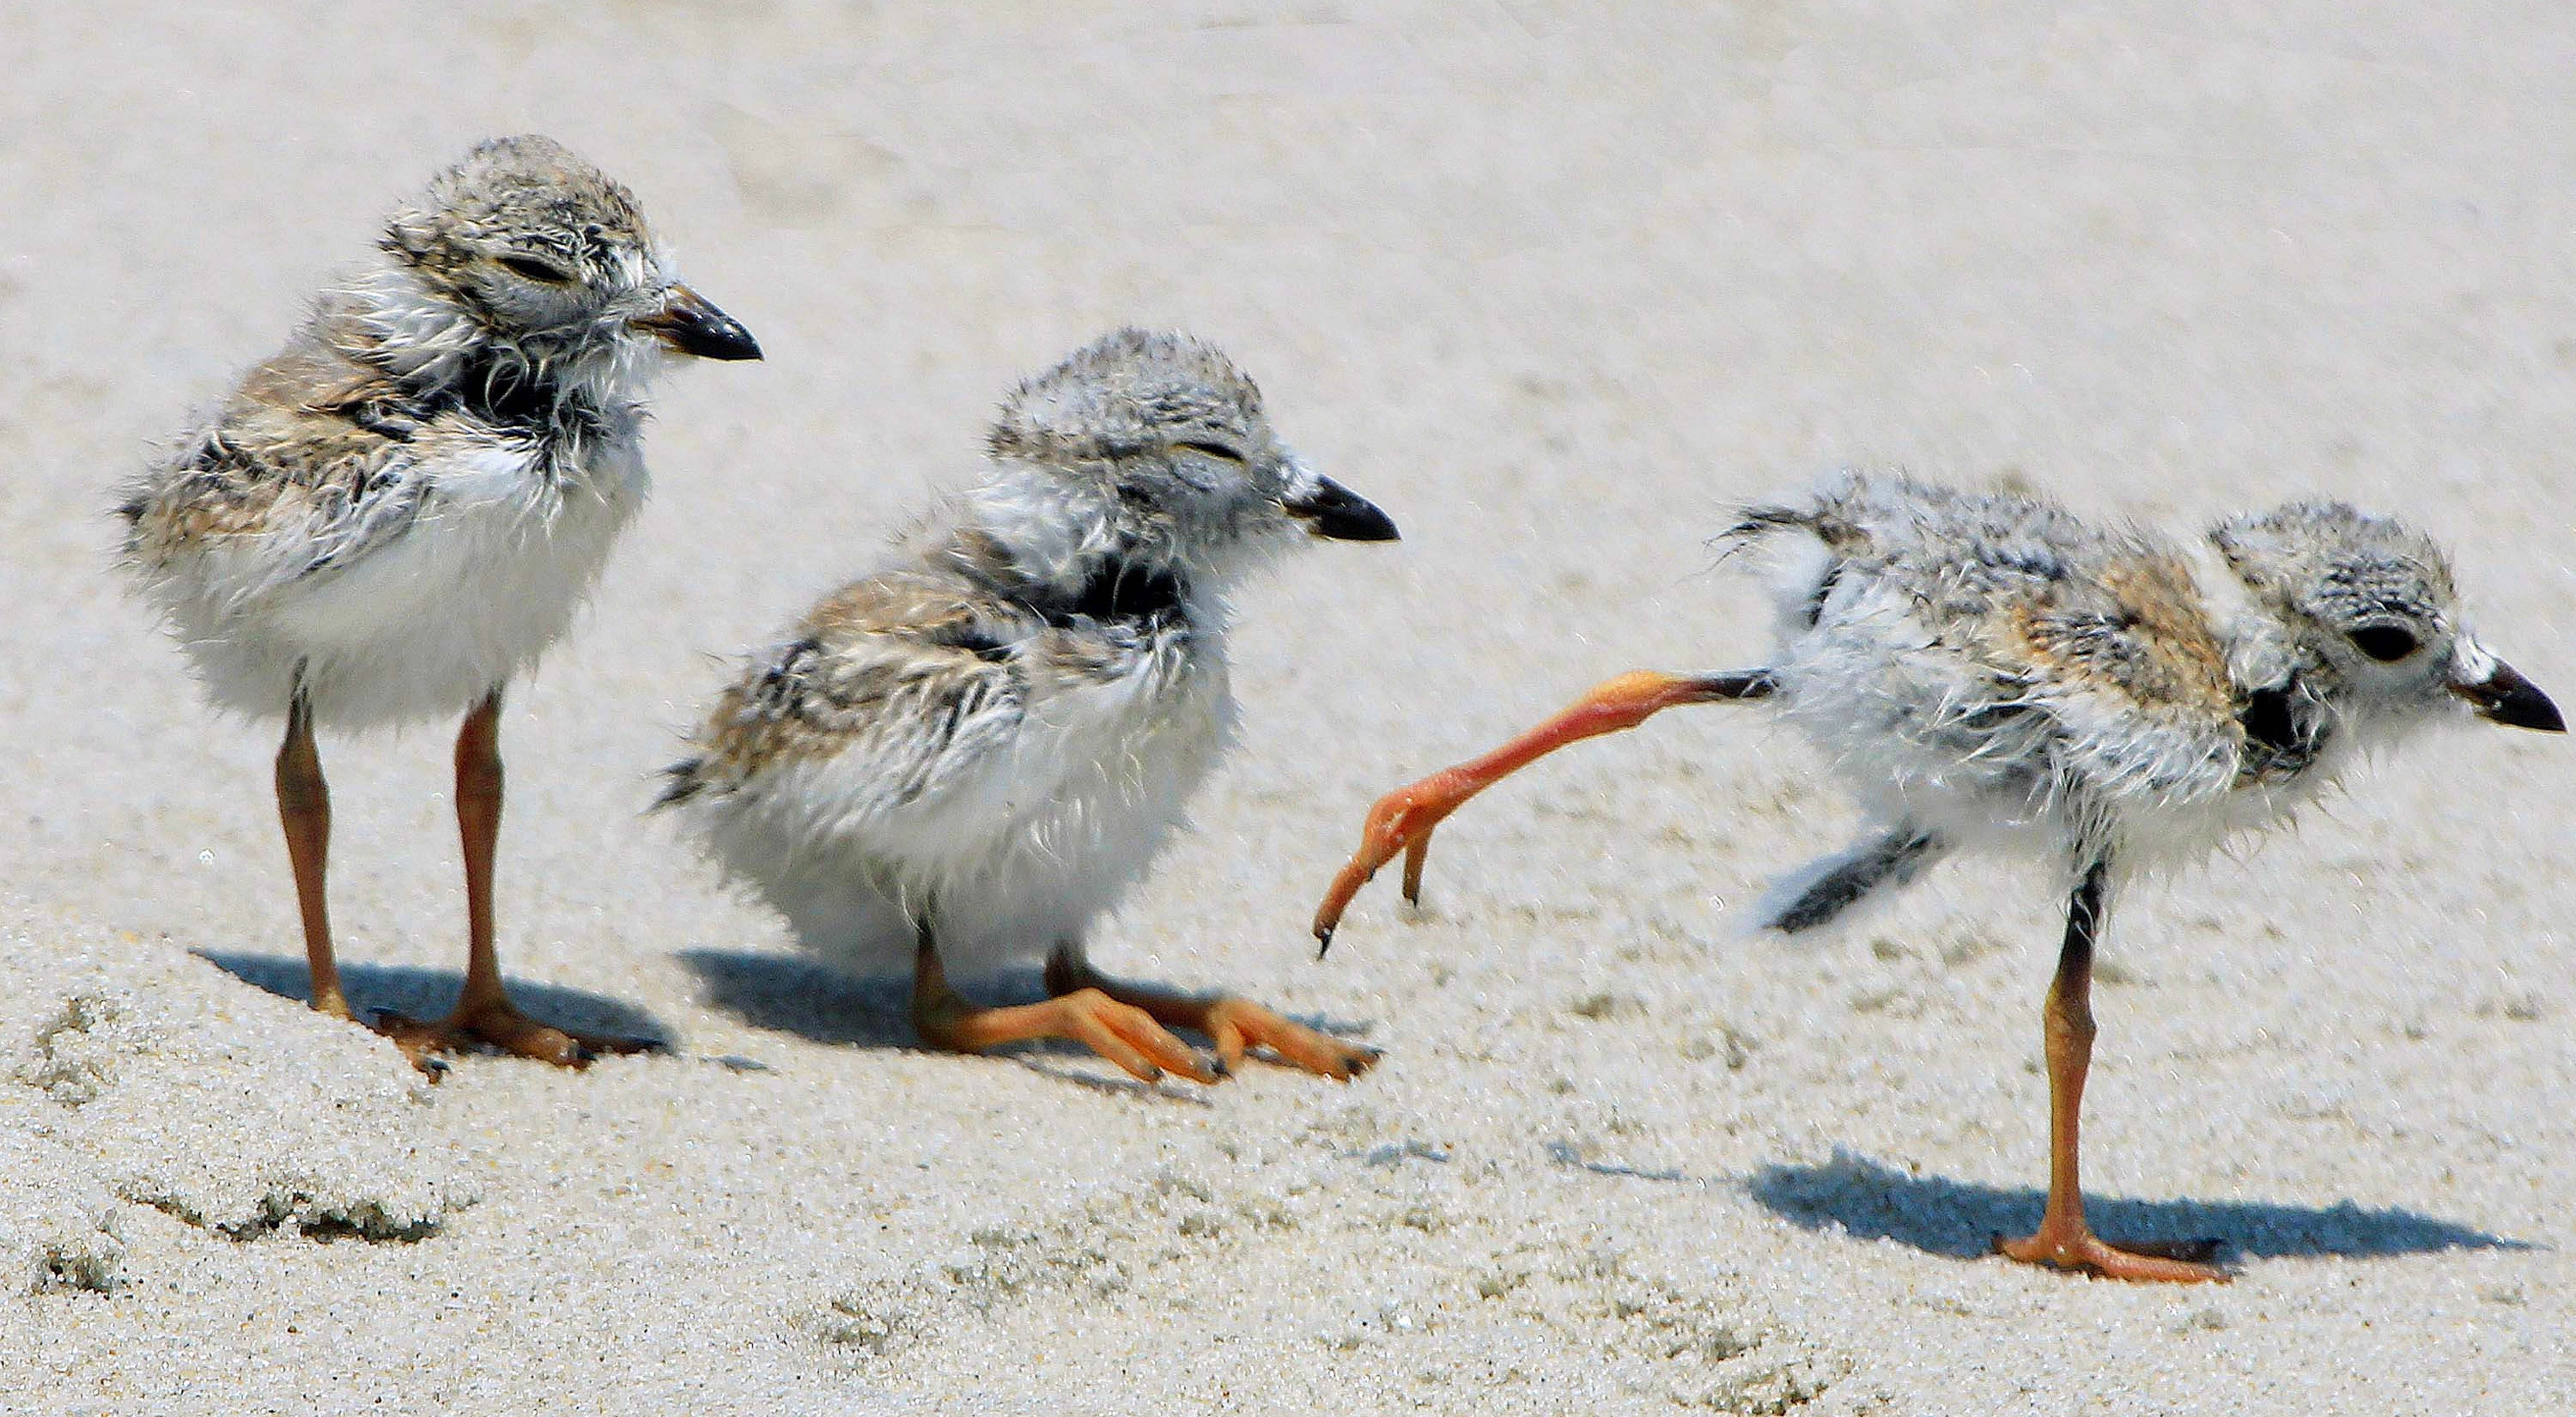 Three piping plover chicks on a sandy beach.